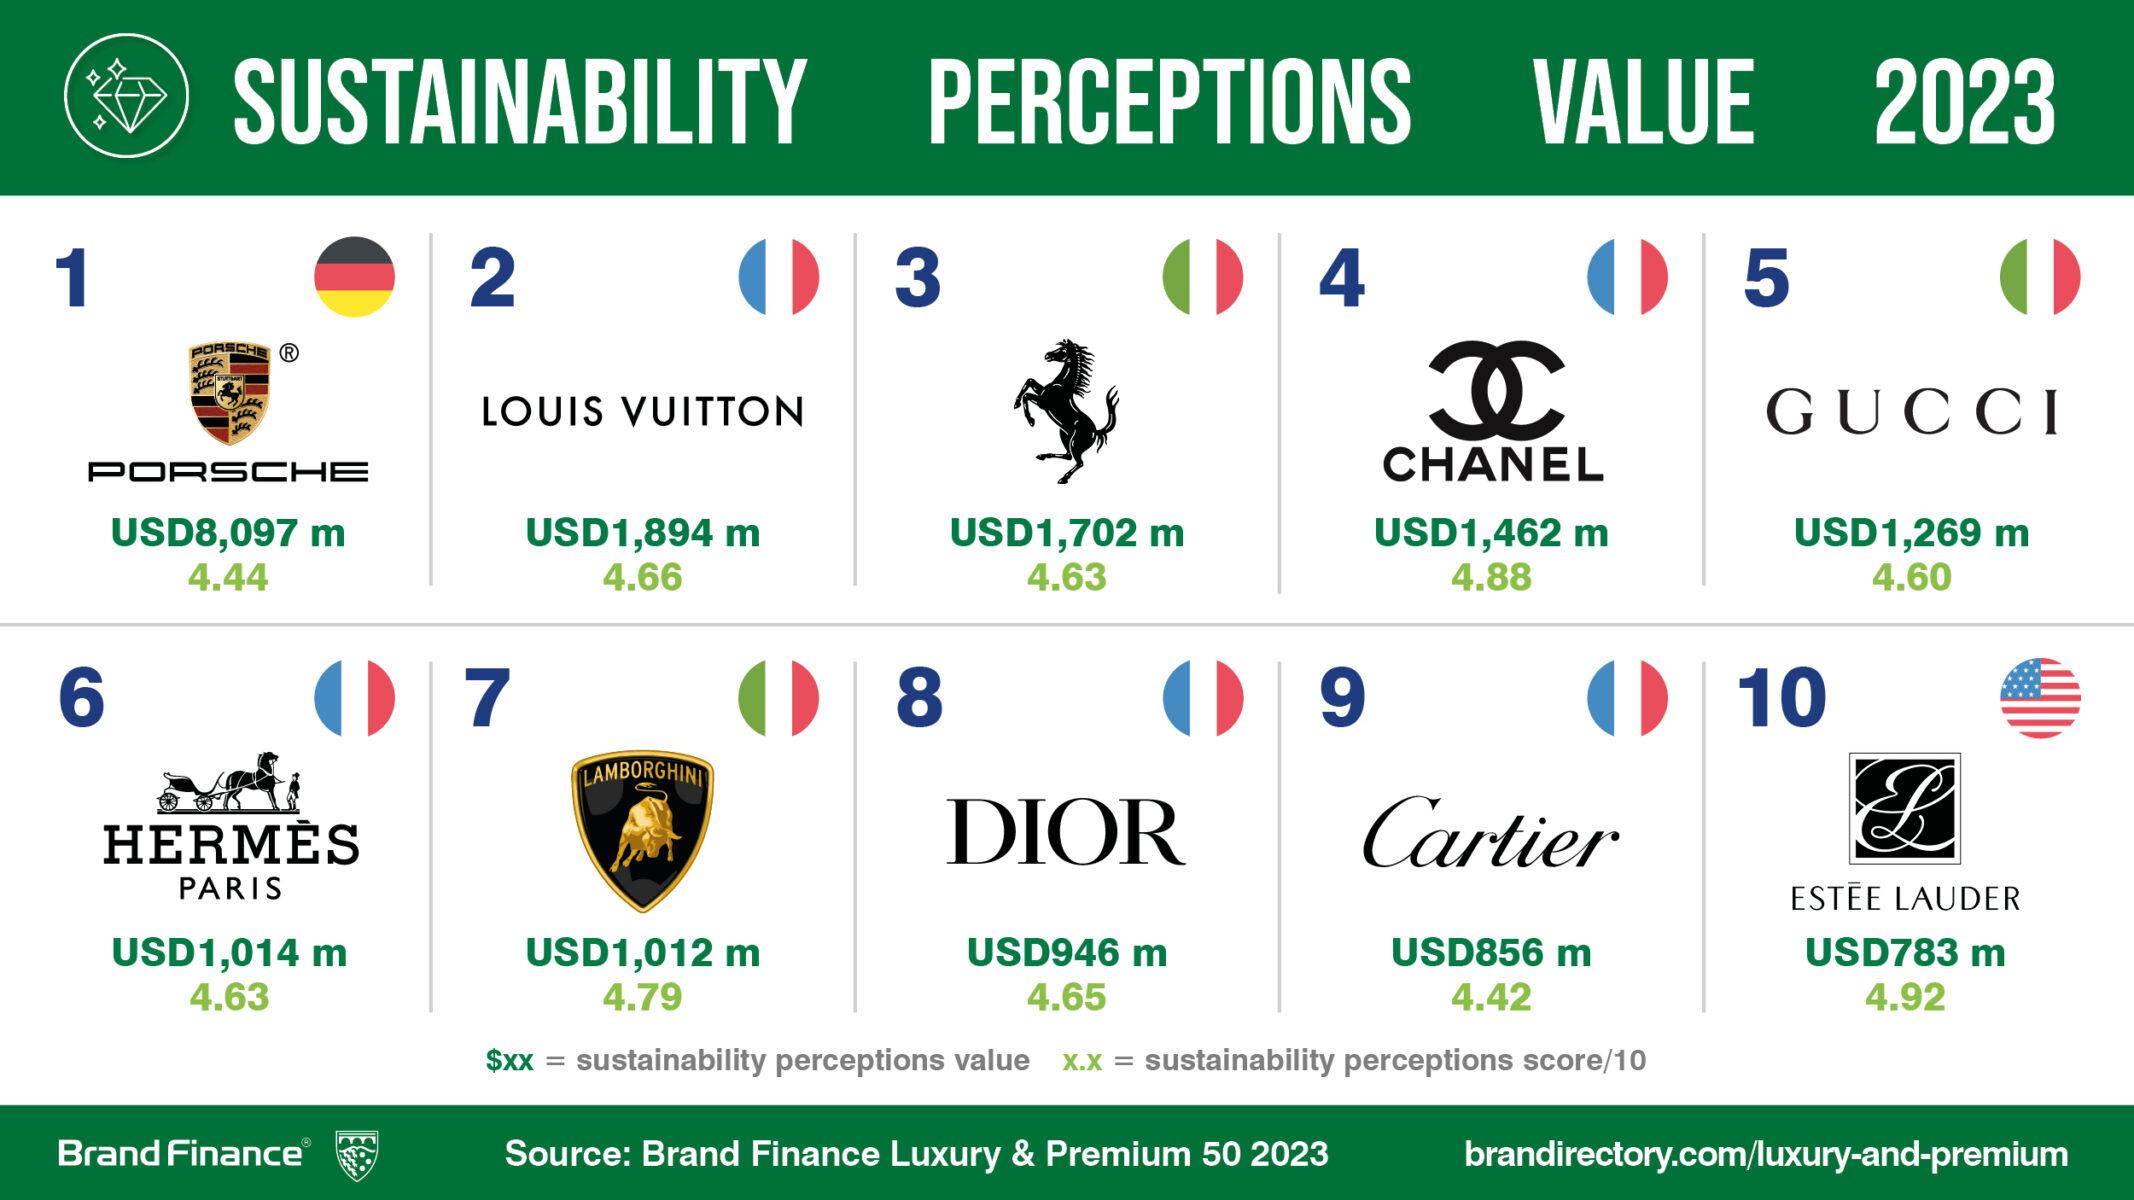 Porsche presents strong results as one of the most valuable luxury brands -  Porsche Newsroom